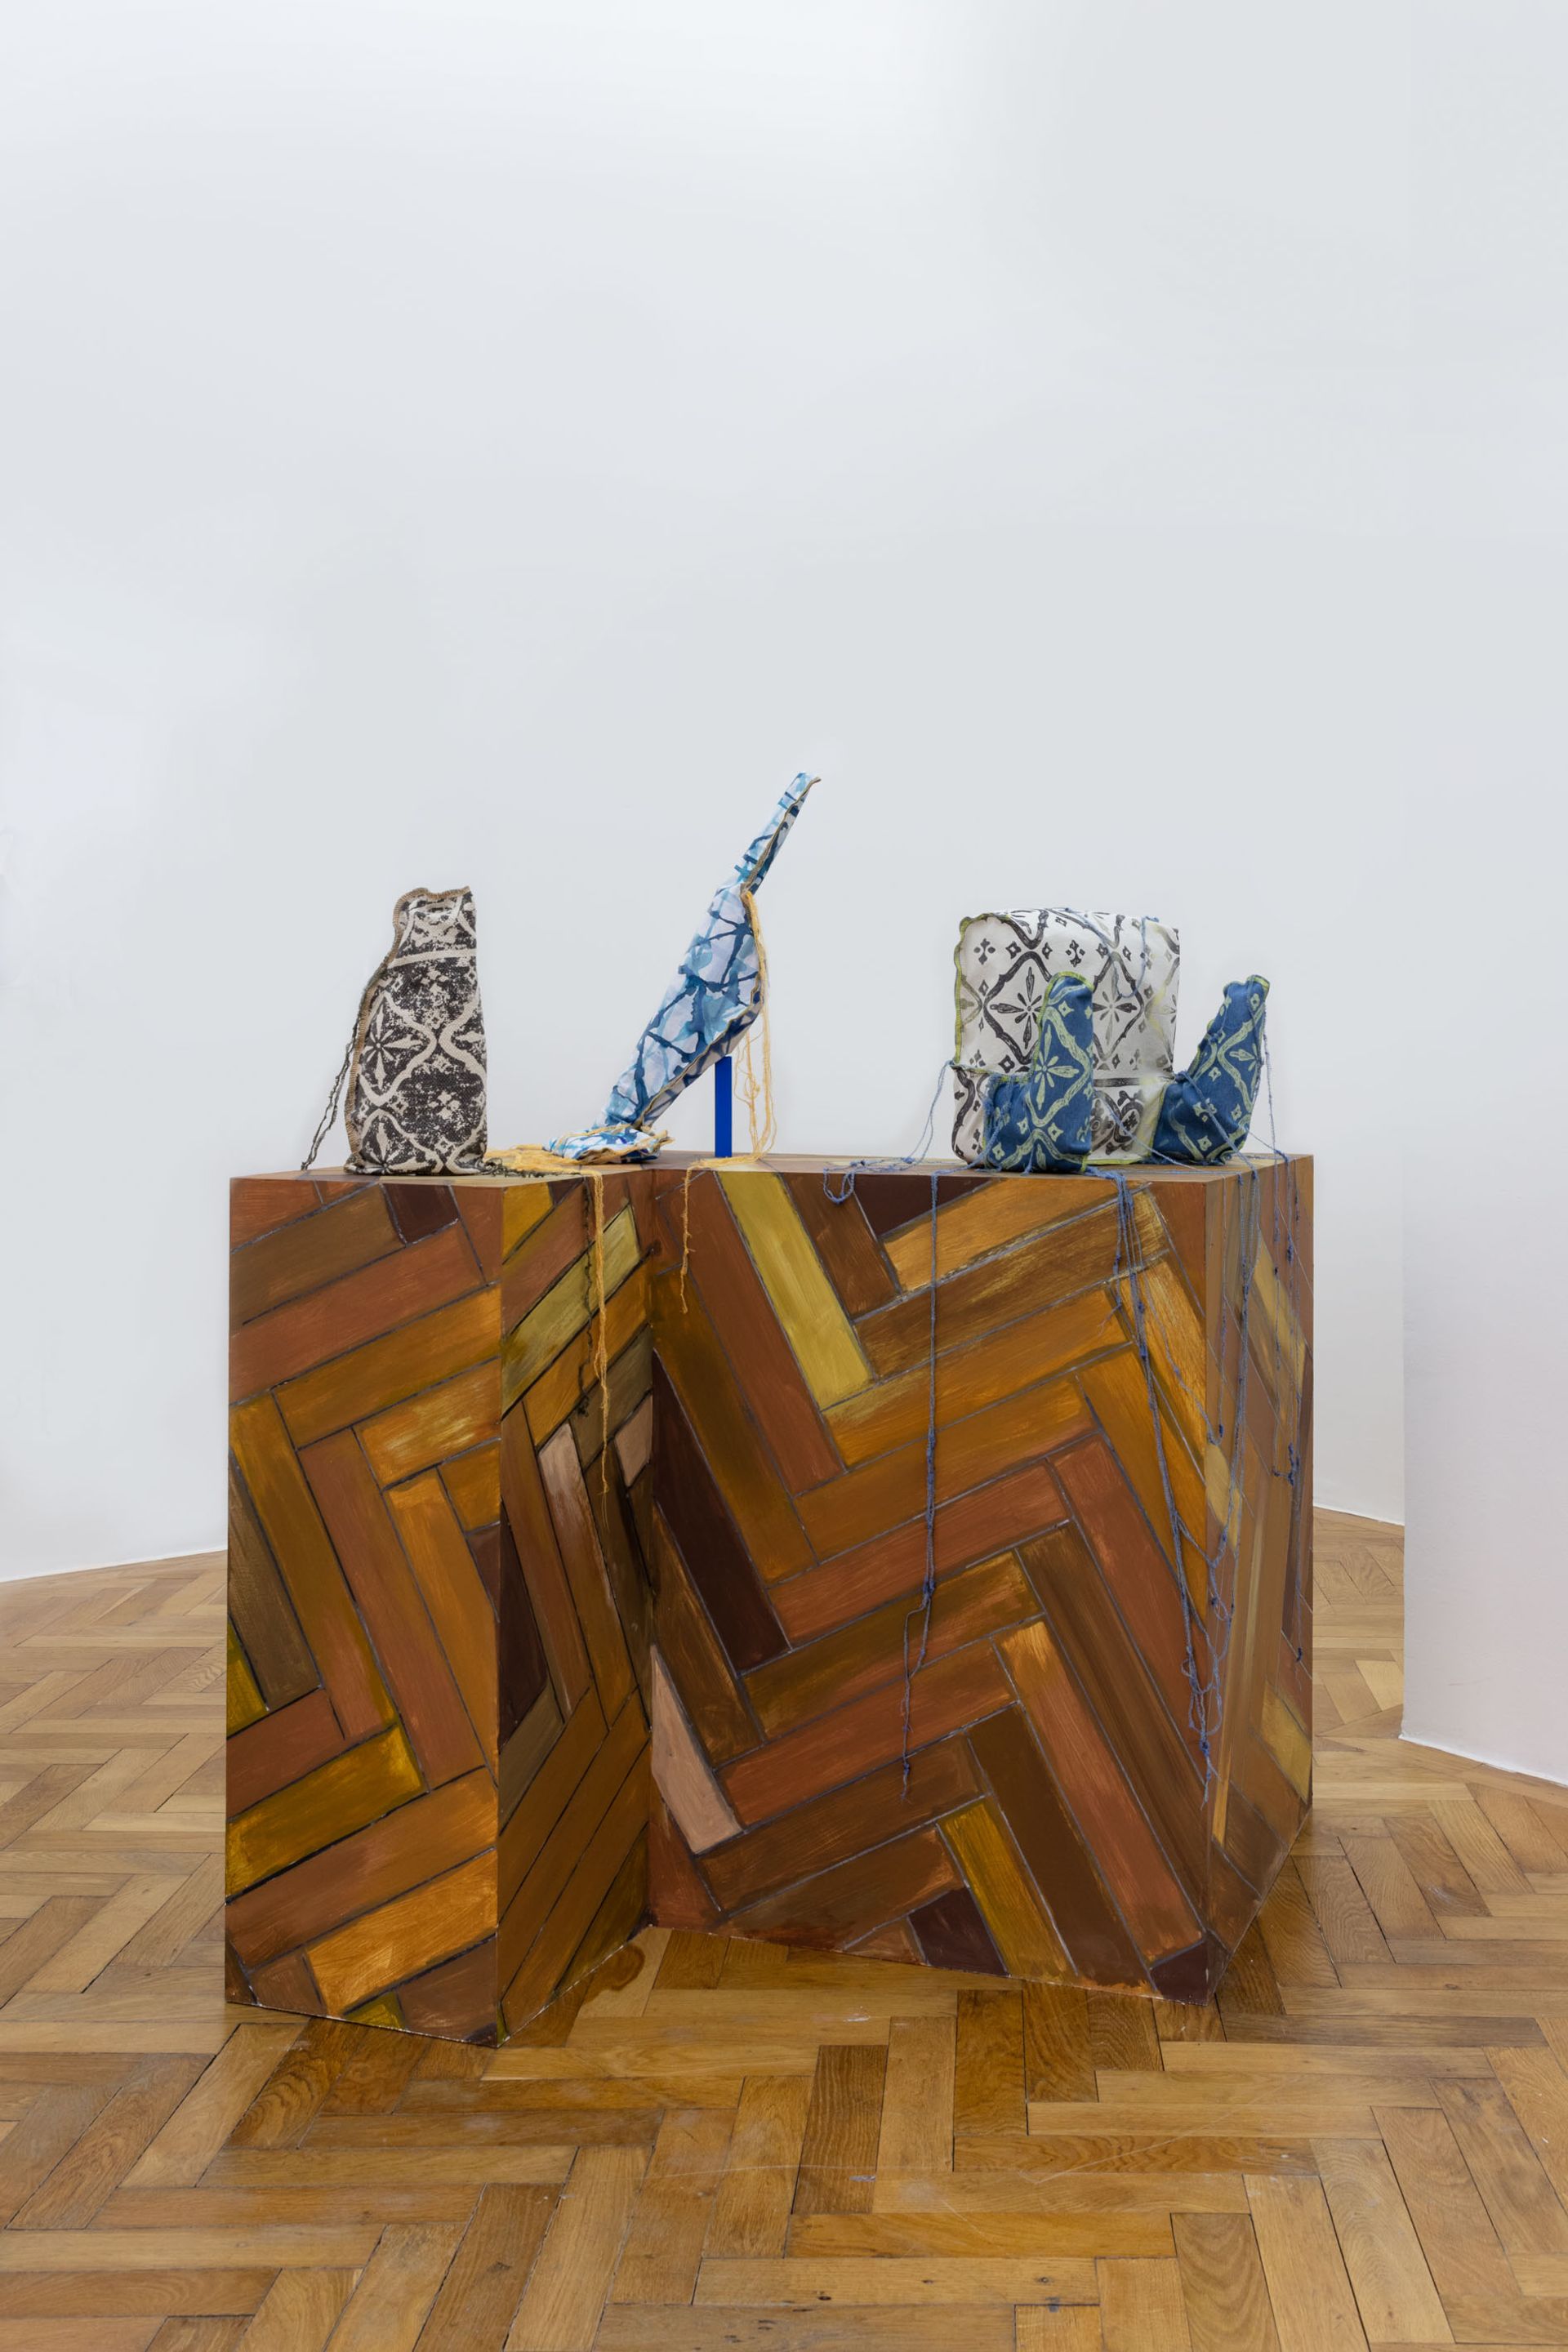 Ana Navas, Tropfenförmiges Lapislazuli, [middle], 2021, Swiffer WetJet, dressed in industrial textiles and copies of the patterns painted by hand, 62 × 32 × 14 cm
